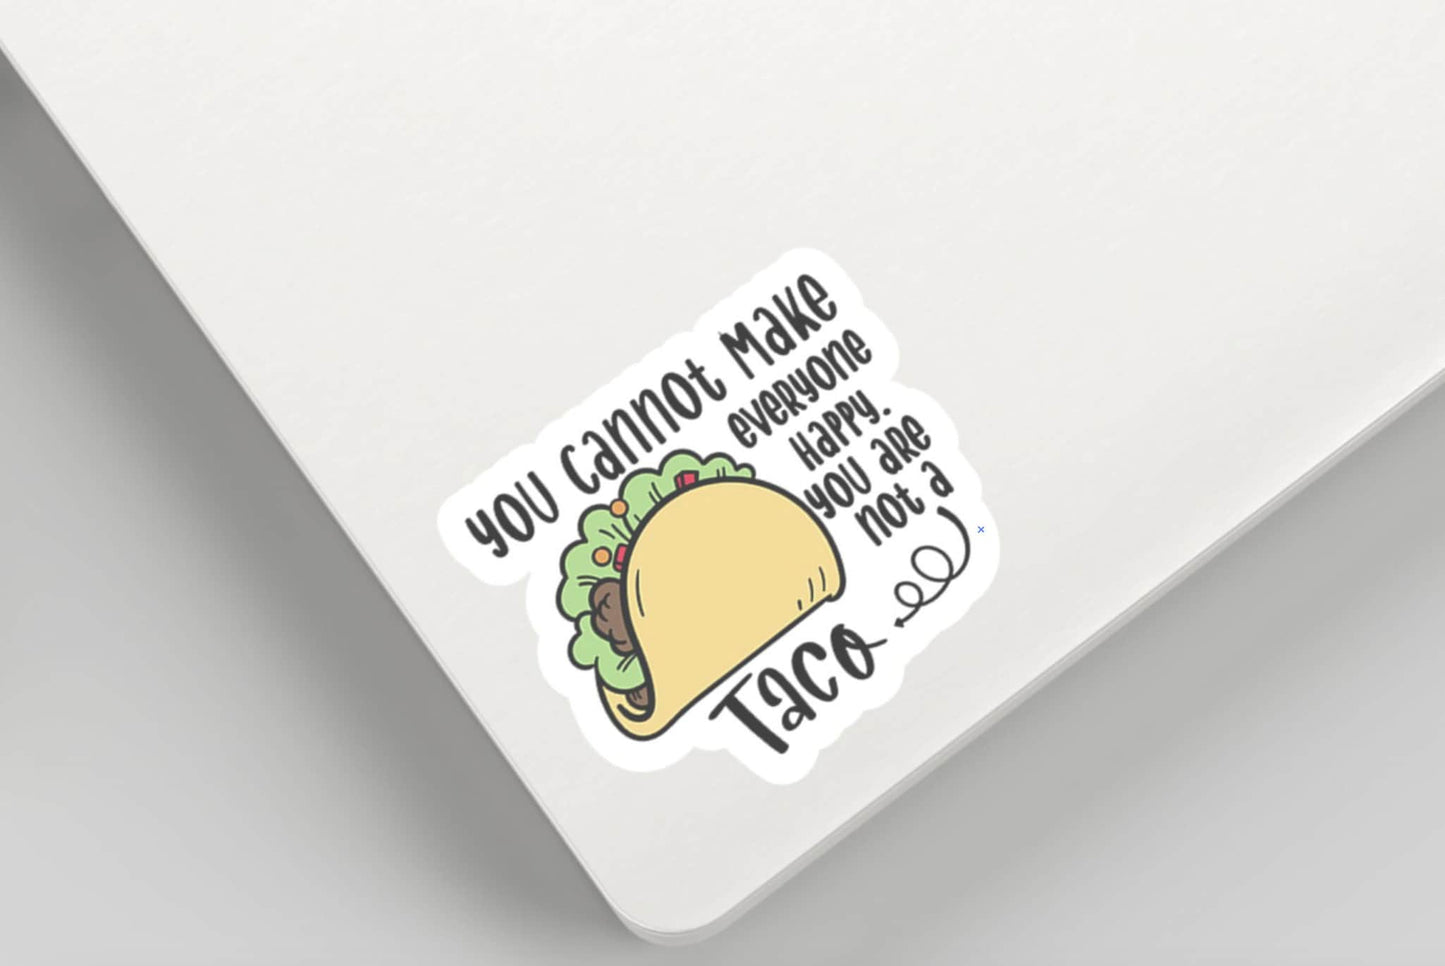 You cannot make everybody happy you are not a taco Vinyl Sticker Water Bottle Sticker Laptop Computer Sticker Taco Sticker Funny Sarcastic